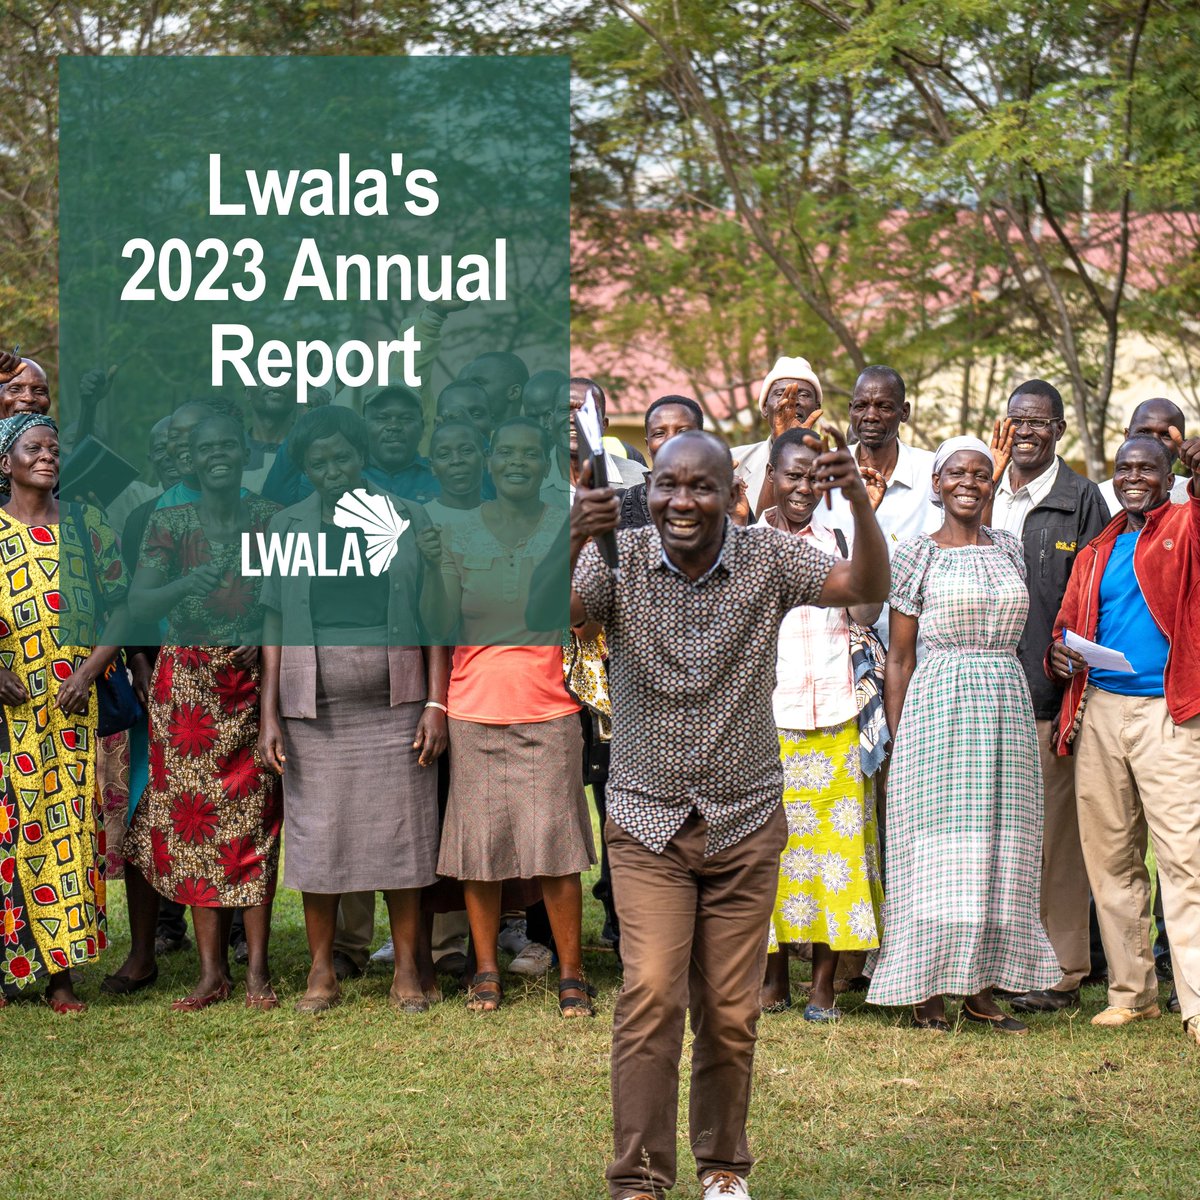 Our 2023 Annual Report is OUT! It includes many of our proudest achievements over the past year, new data showing our impact, and stories of change within the communities we serve. We hope you find something inside that inspires you. Here is the report: lwala.org/2023-annual-re….